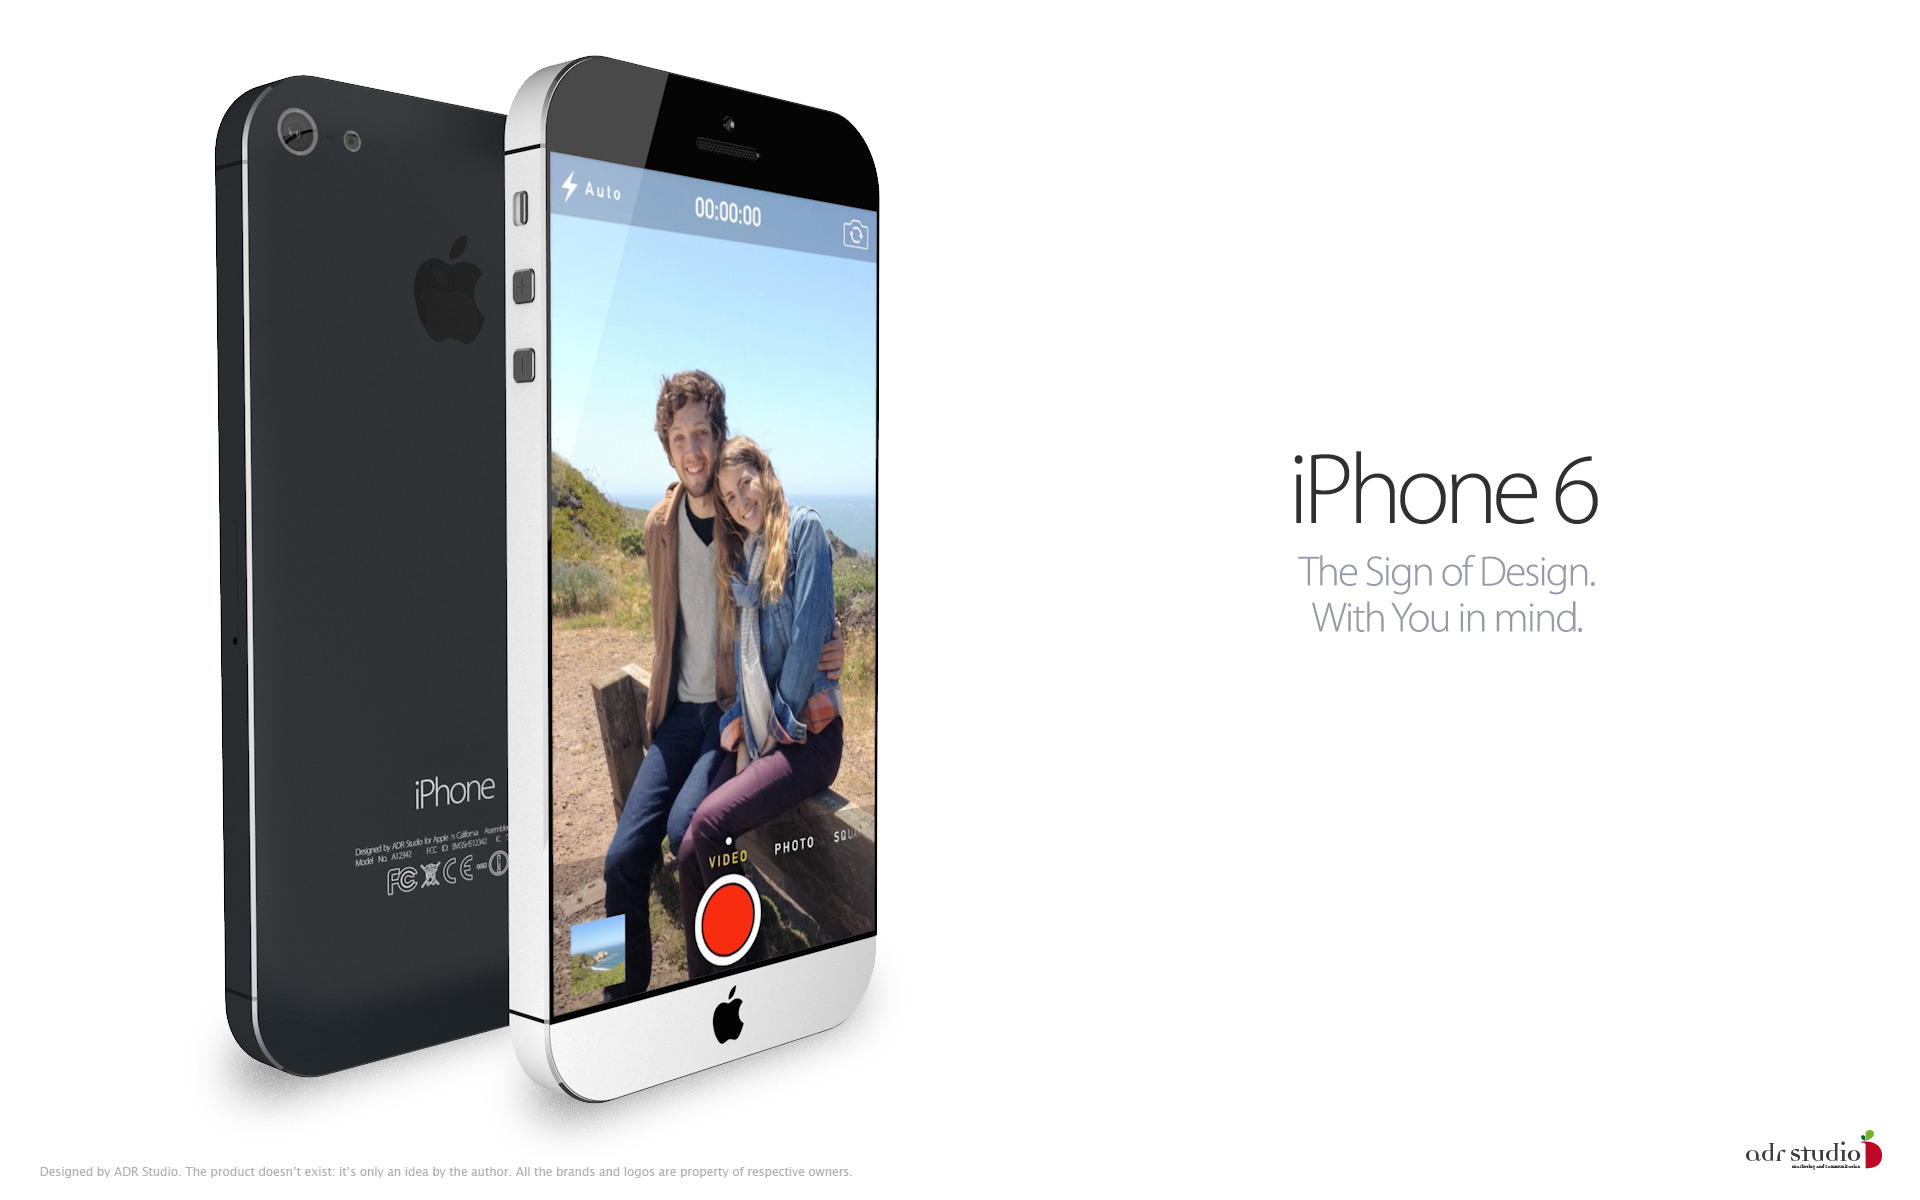 Iphone 6 with a 8 Mpx camera, but still looking great